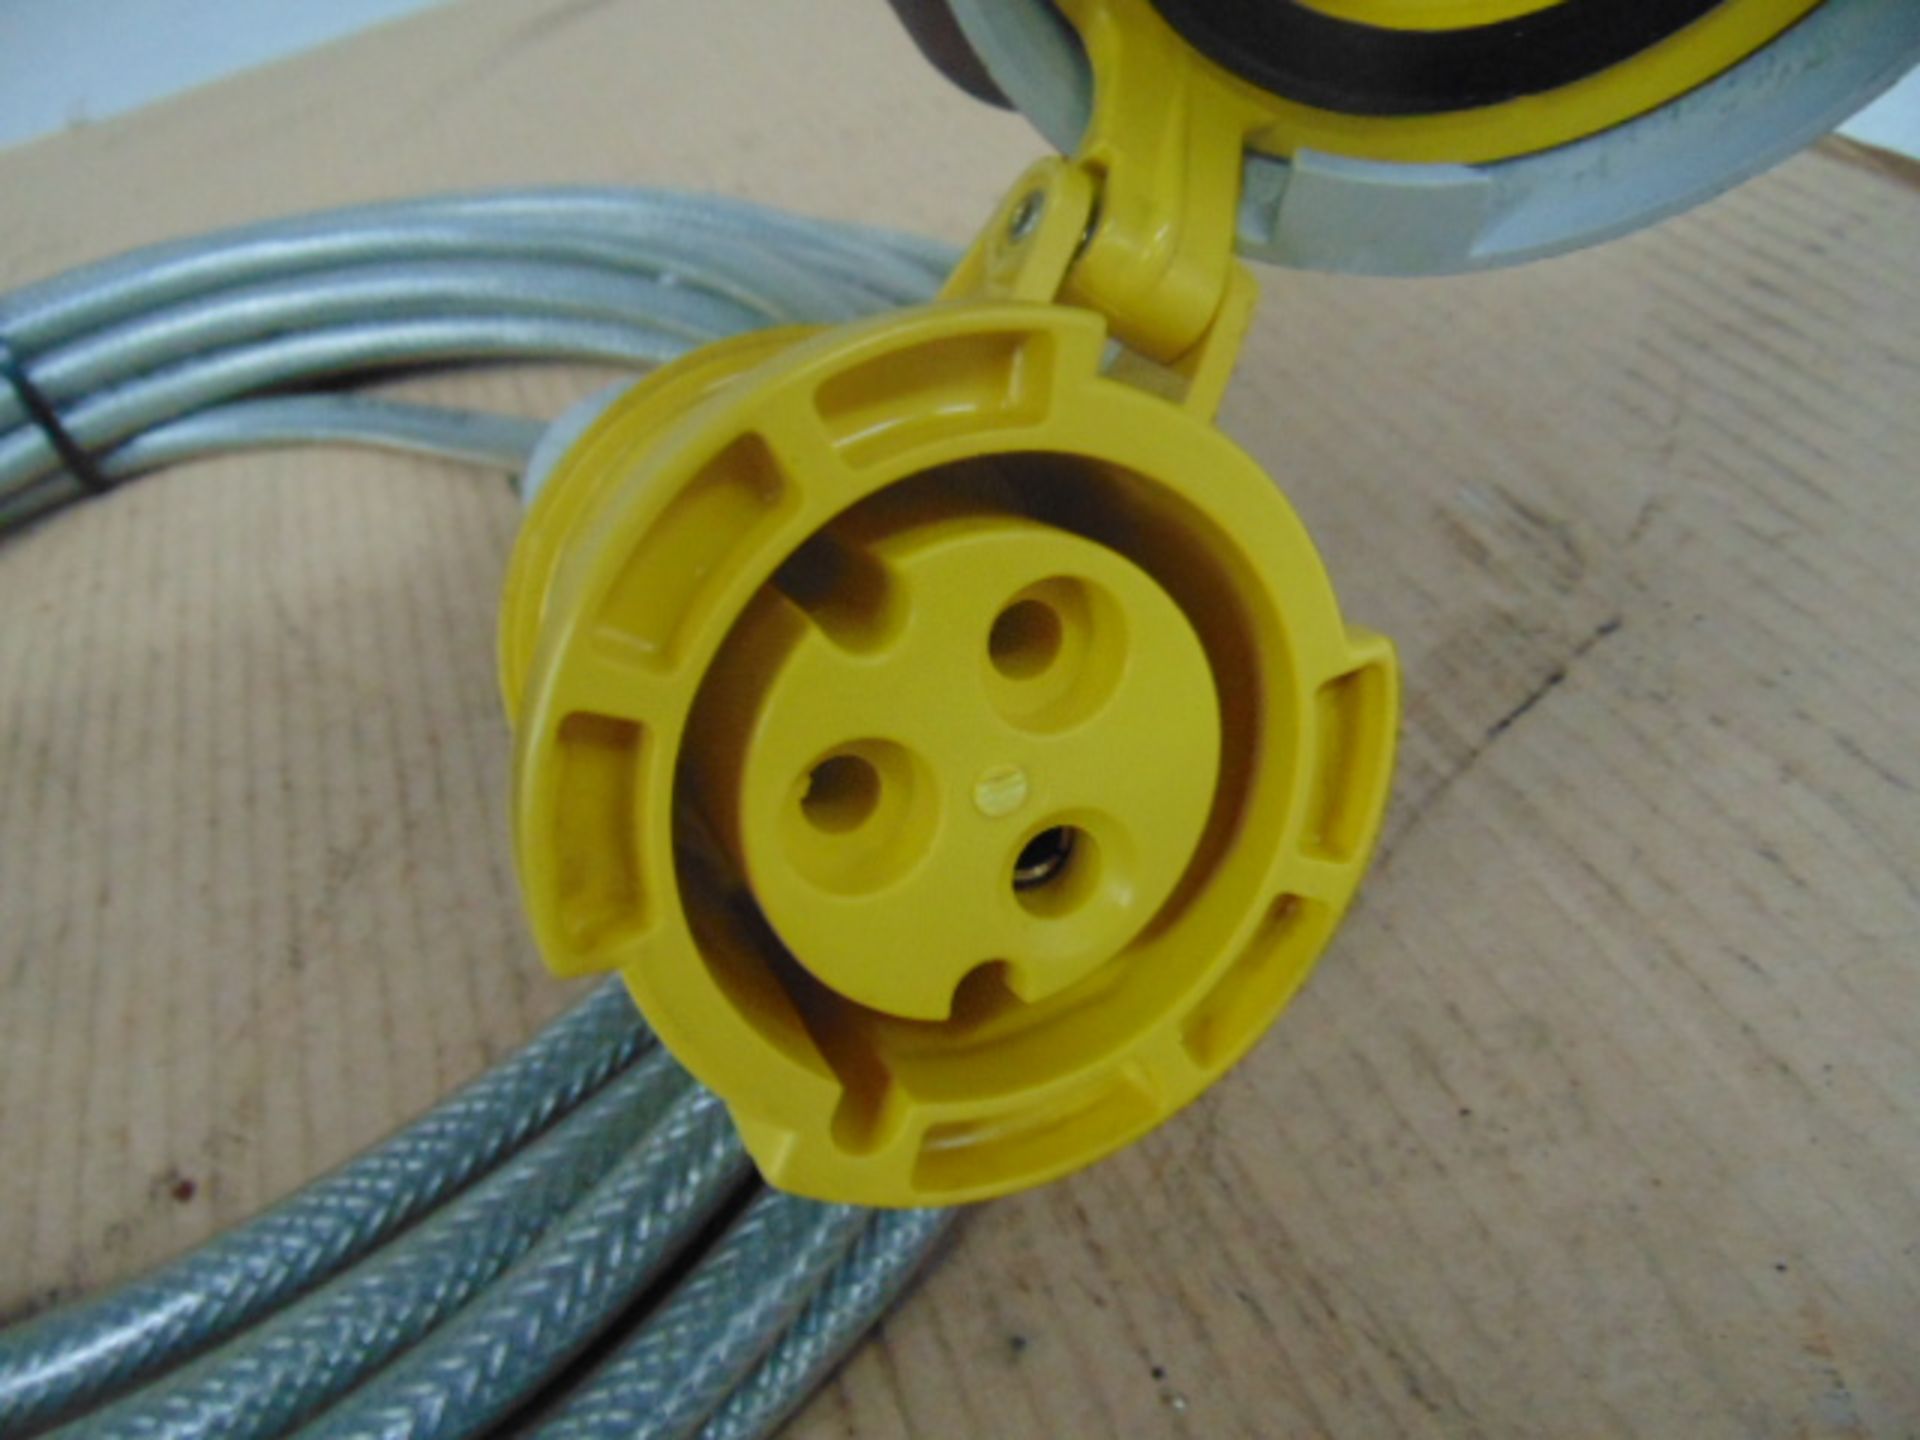 2 x 110V Power Cables - Image 6 of 8